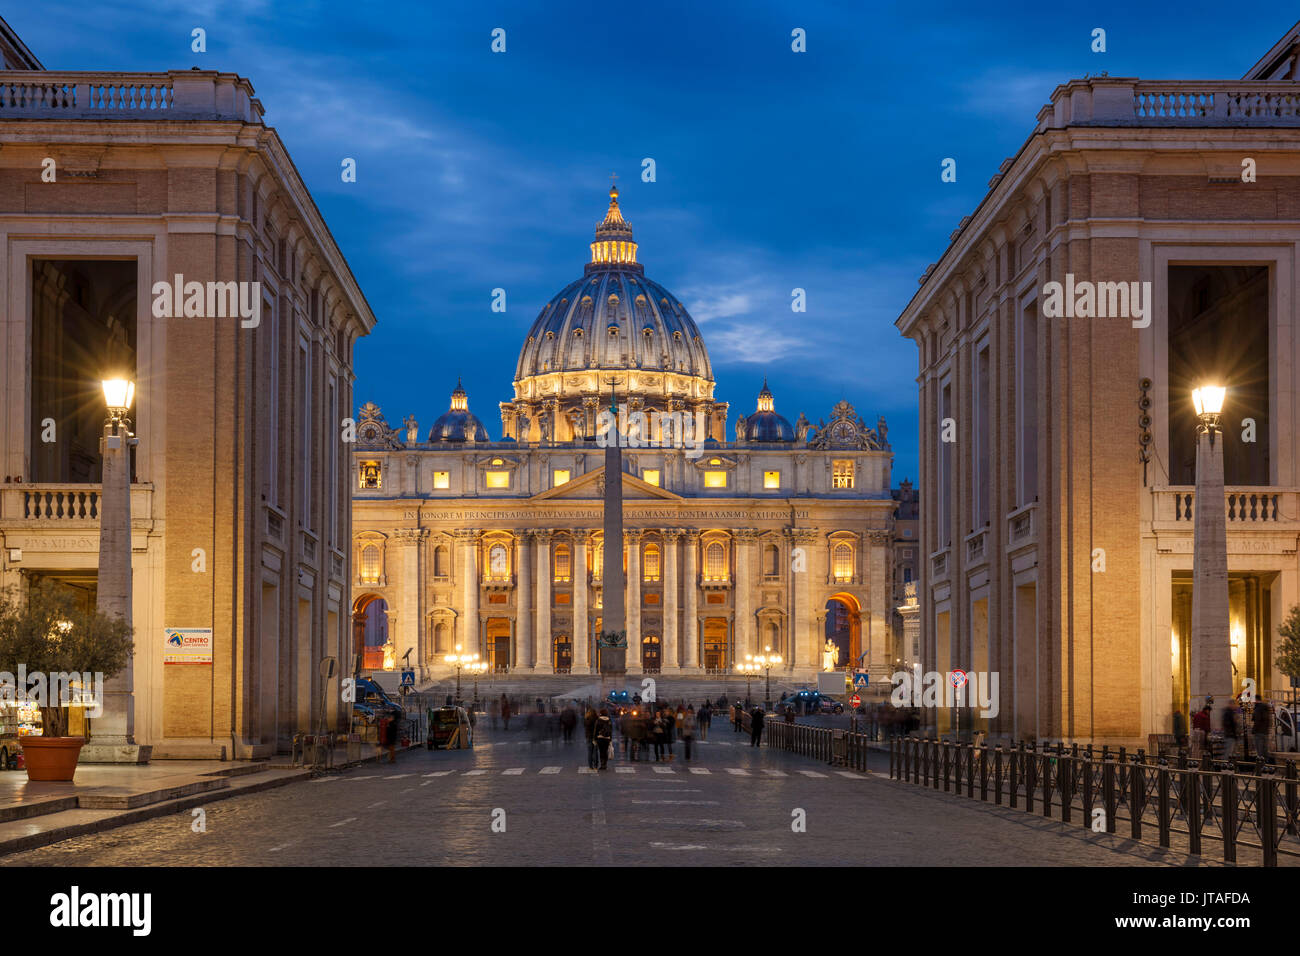 St. Peters Square and St. Peters Basilica at night, Vatican City, UNESCO World Heritage Site, Rome, Lazio, Italy, Europe Stock Photo